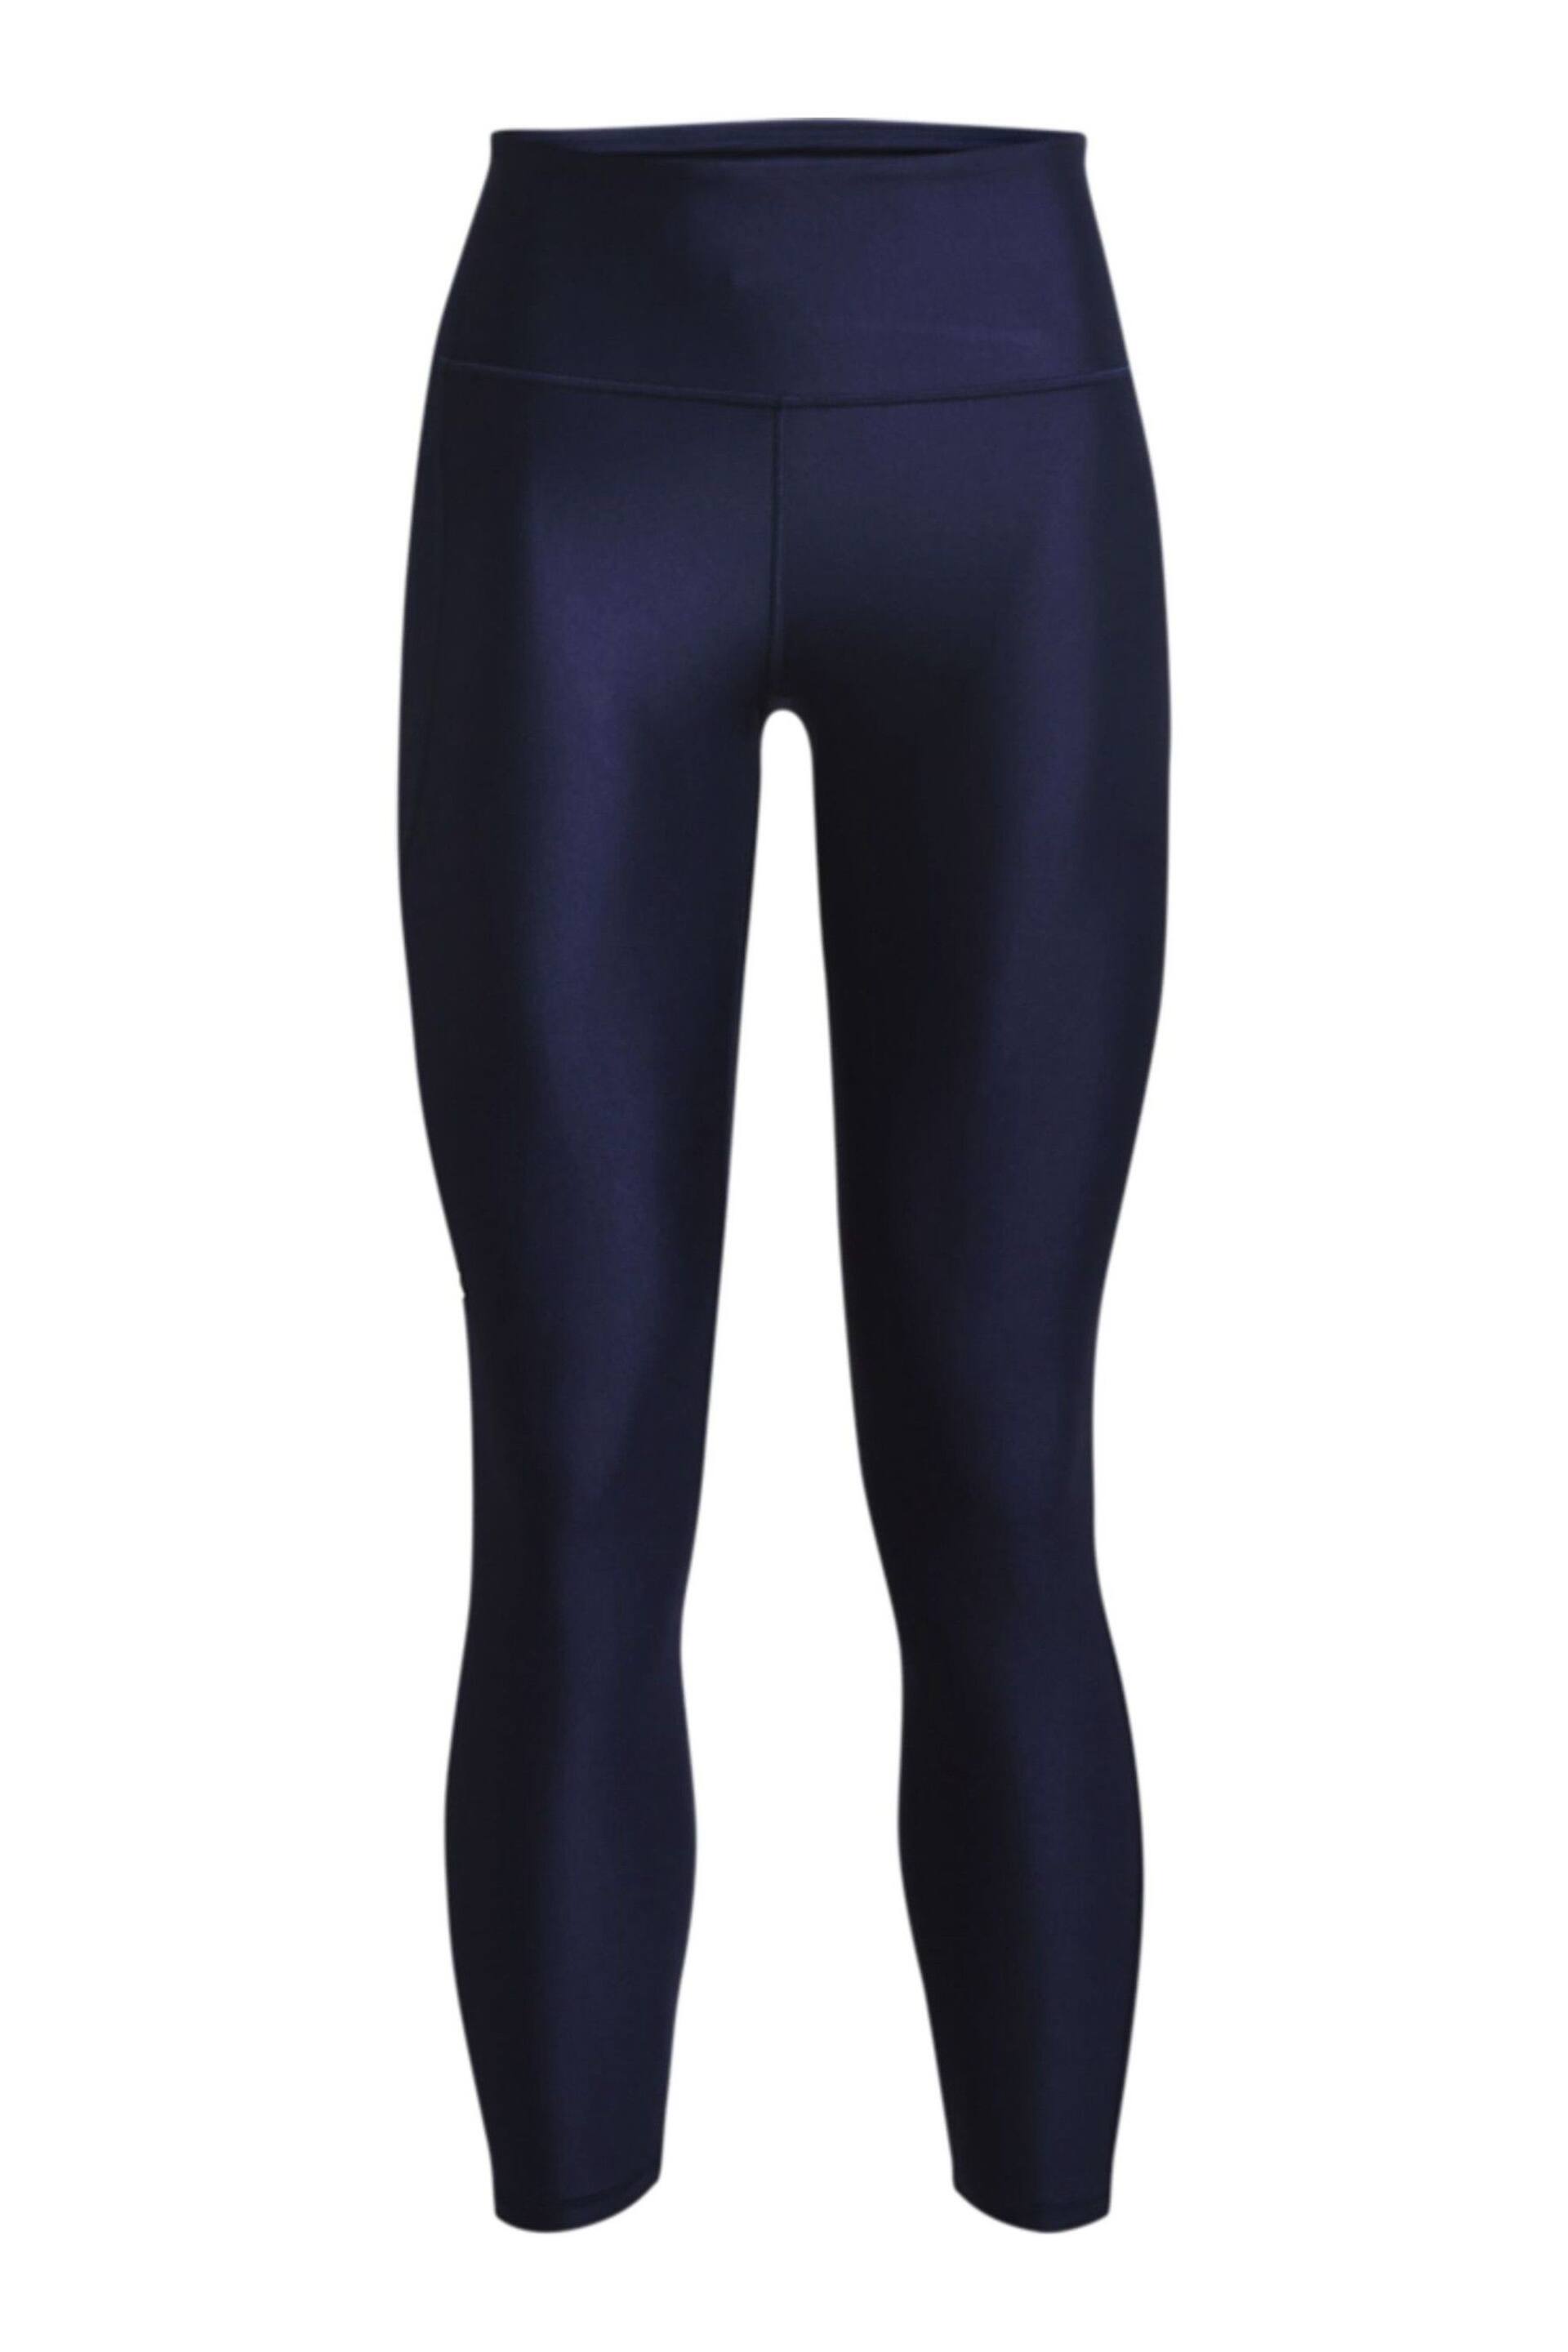 Under Armour High Rise 7/8 Leggings - Image 5 of 6